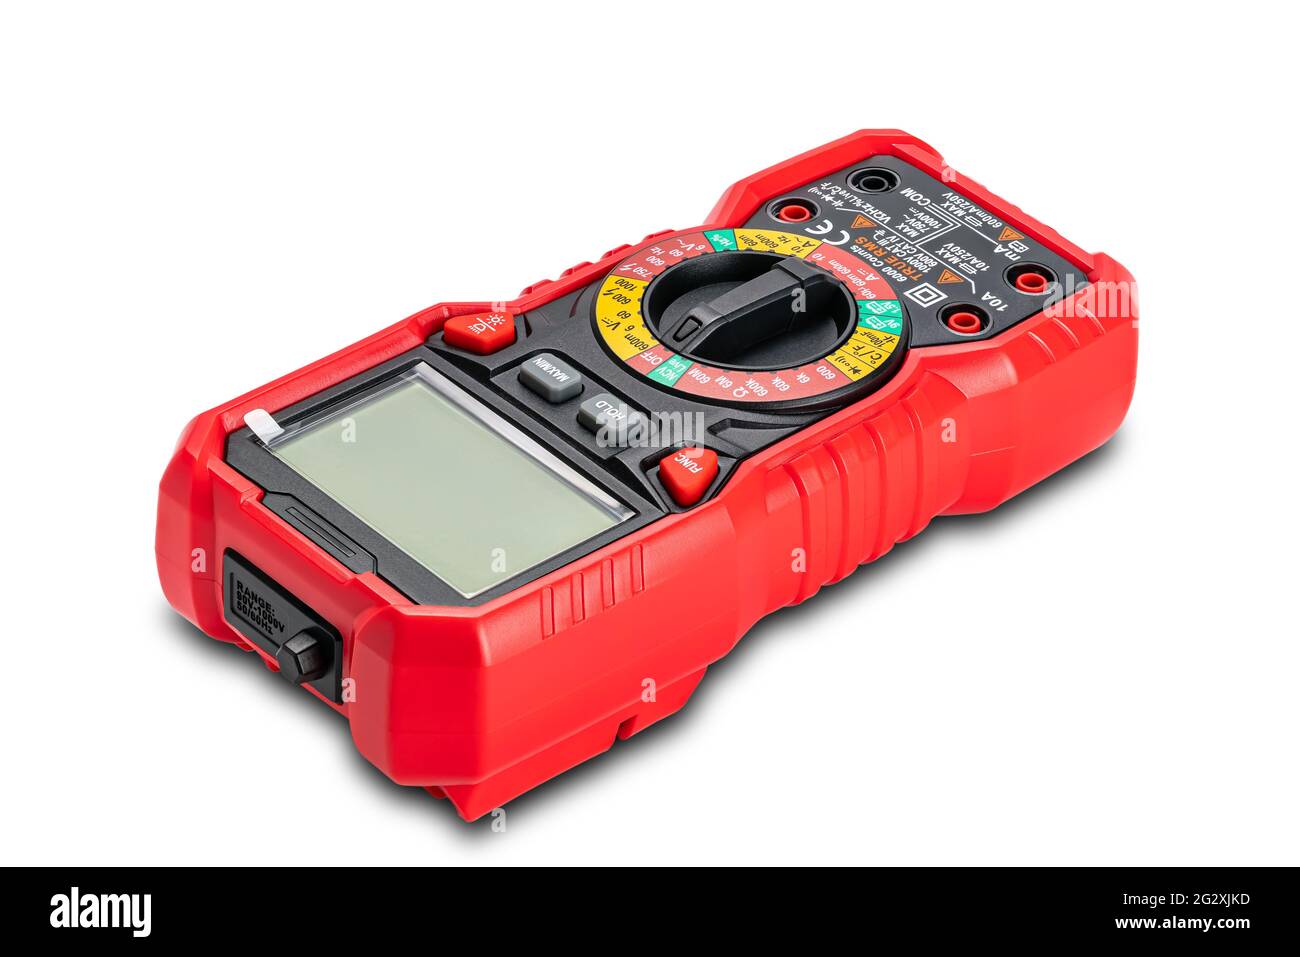 High angle view of red portable digital multimeters or multitester isolated on white background with clipping path. Stock Photo